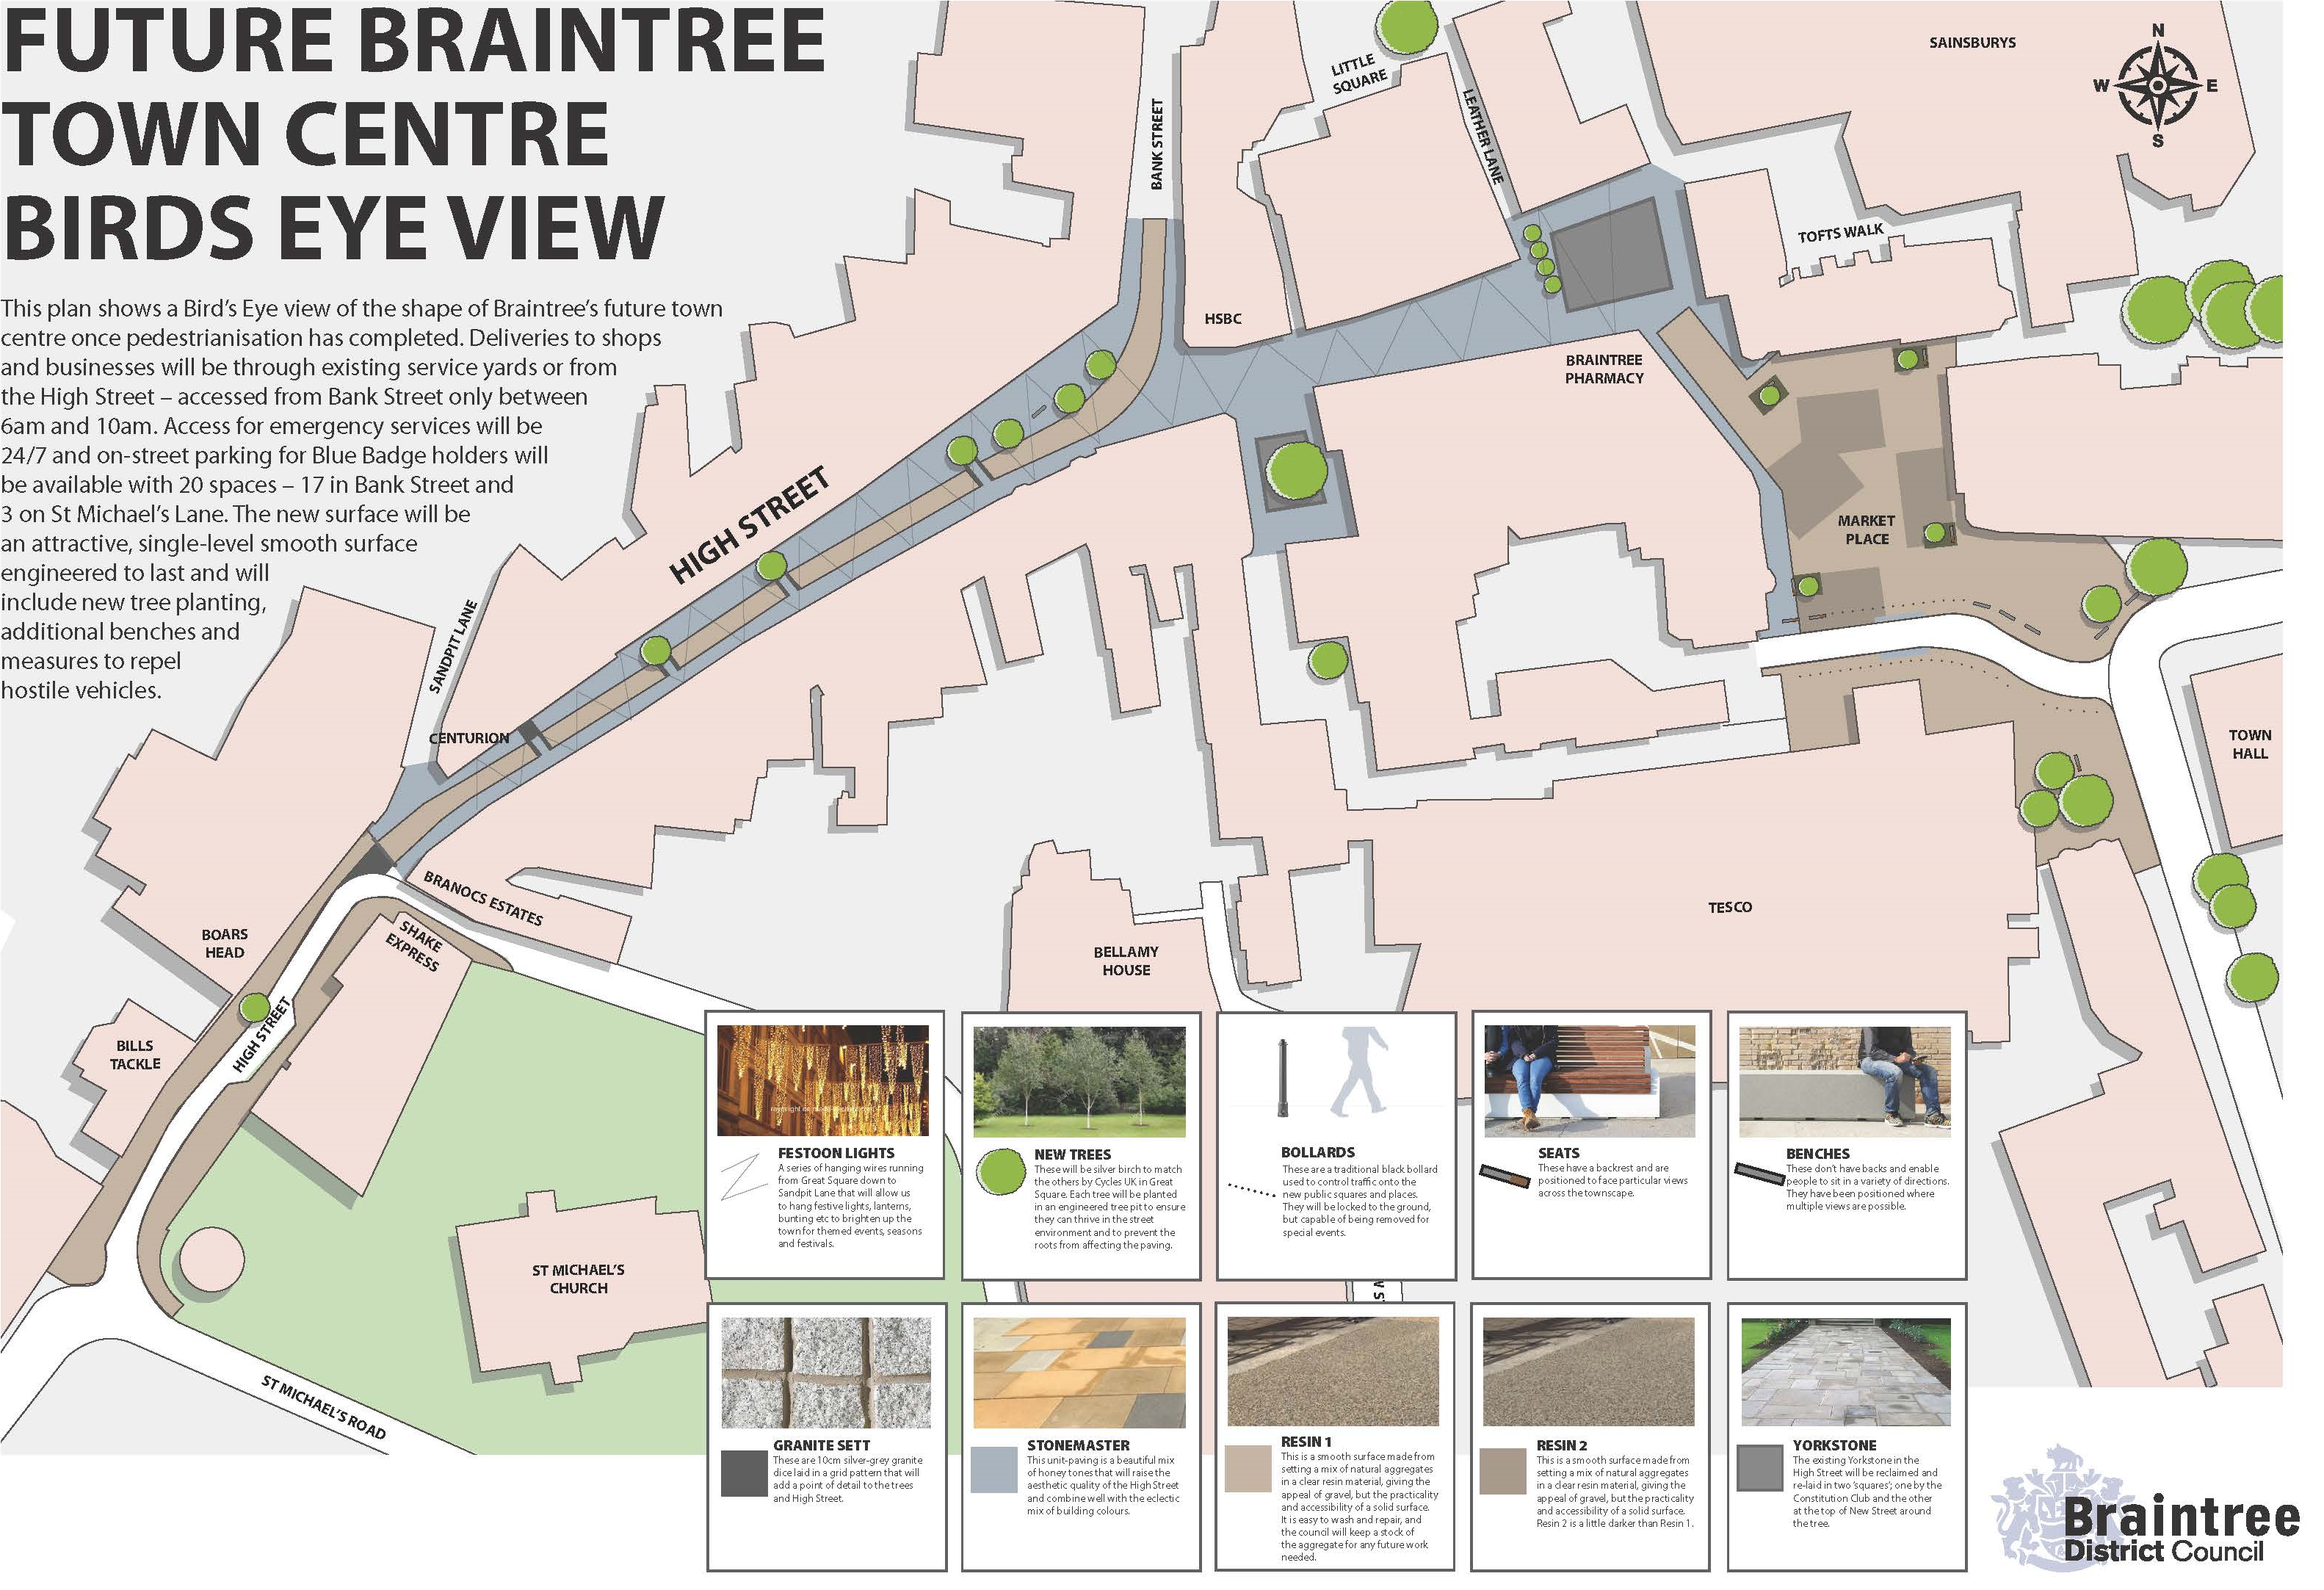 A birds eye view of the planned work for the town centre